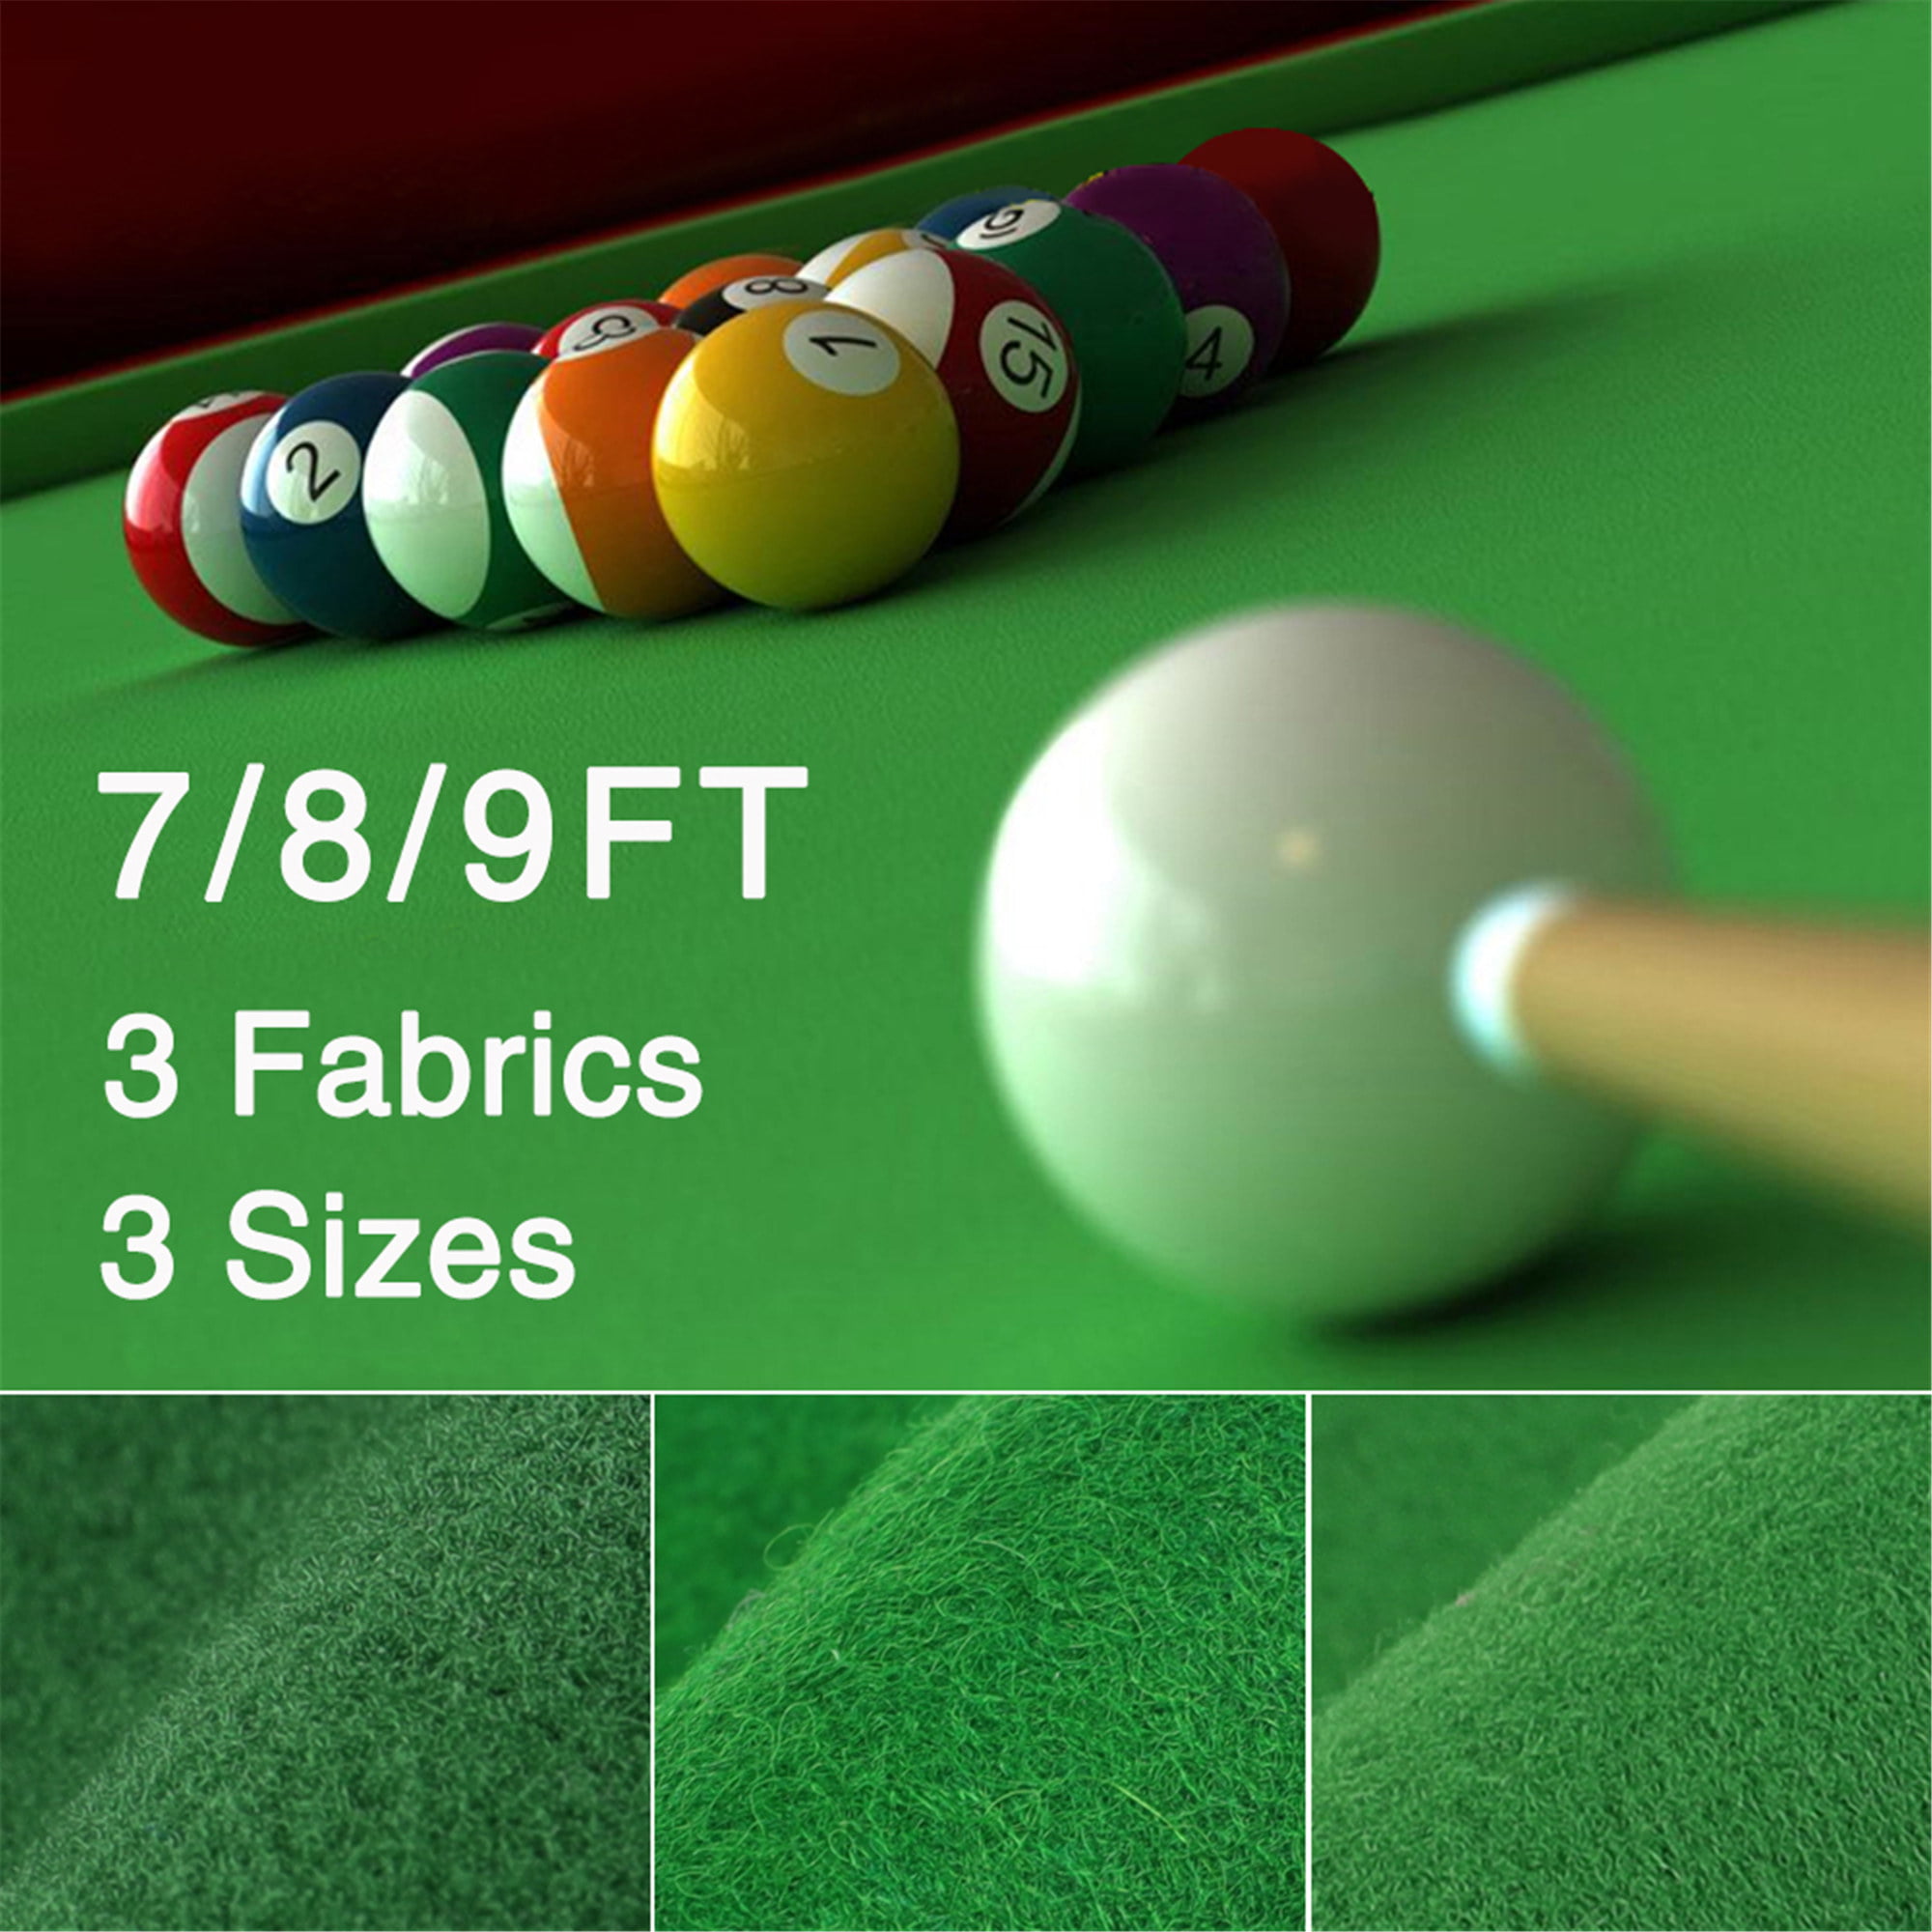 Worsted Fast Speed Pool Table Felt Billiard Cloth for 7ft 8ft 9ft Foot  Snooker Table w/ Strips Green - Walmart.com